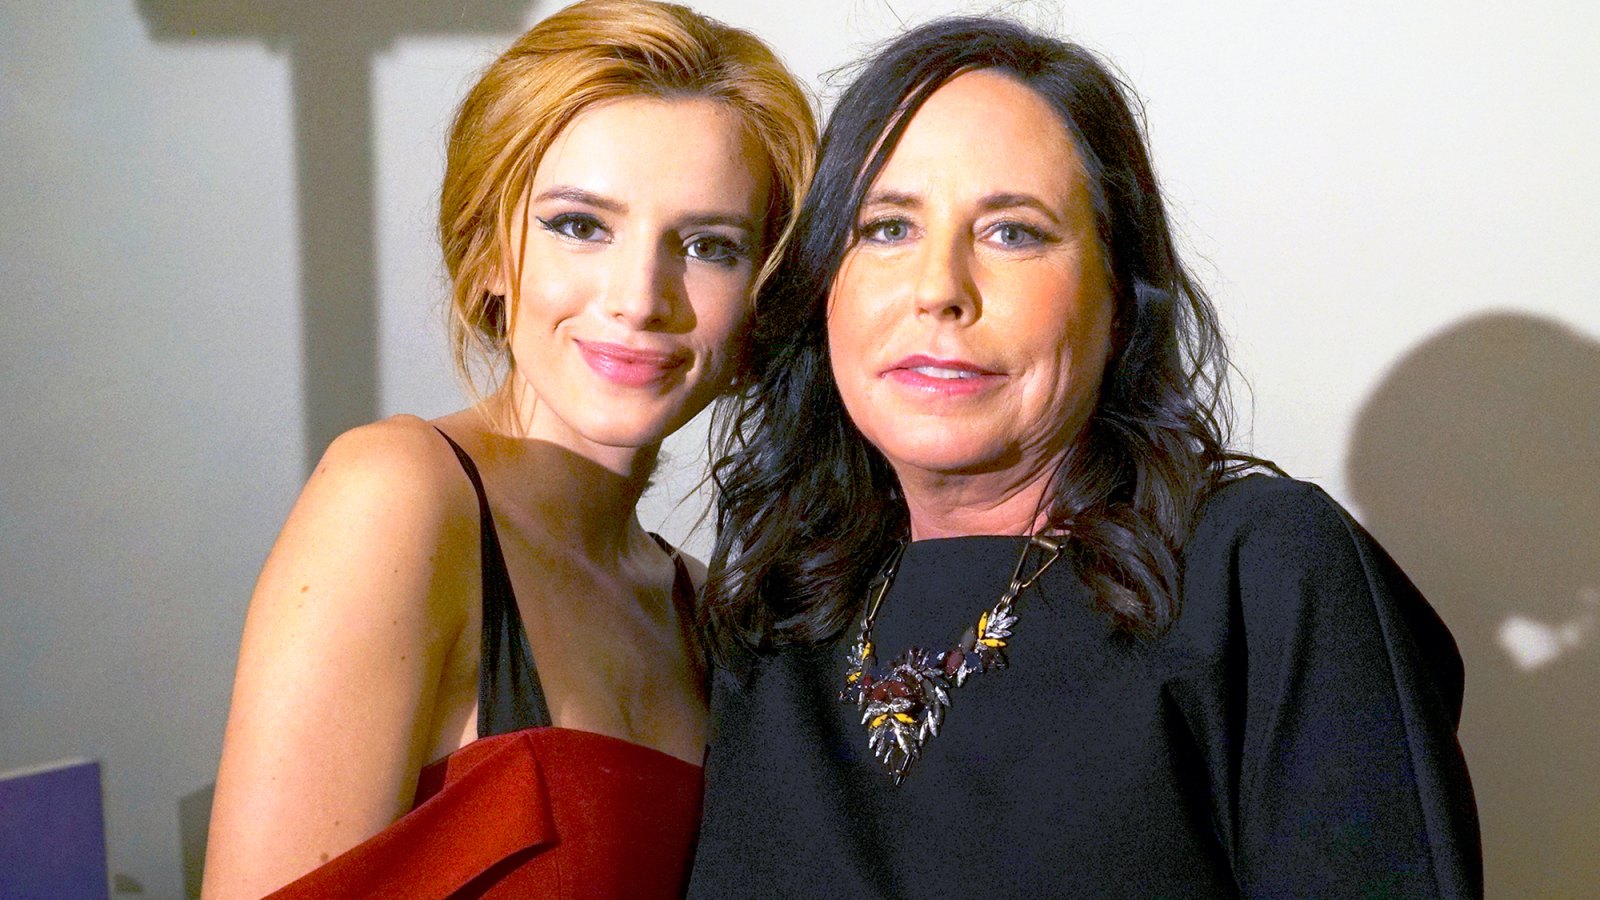 Bella Thorne and I Marlene King attend Freeform's 'Famous In Love' Season One premiere on October 14, 2016.